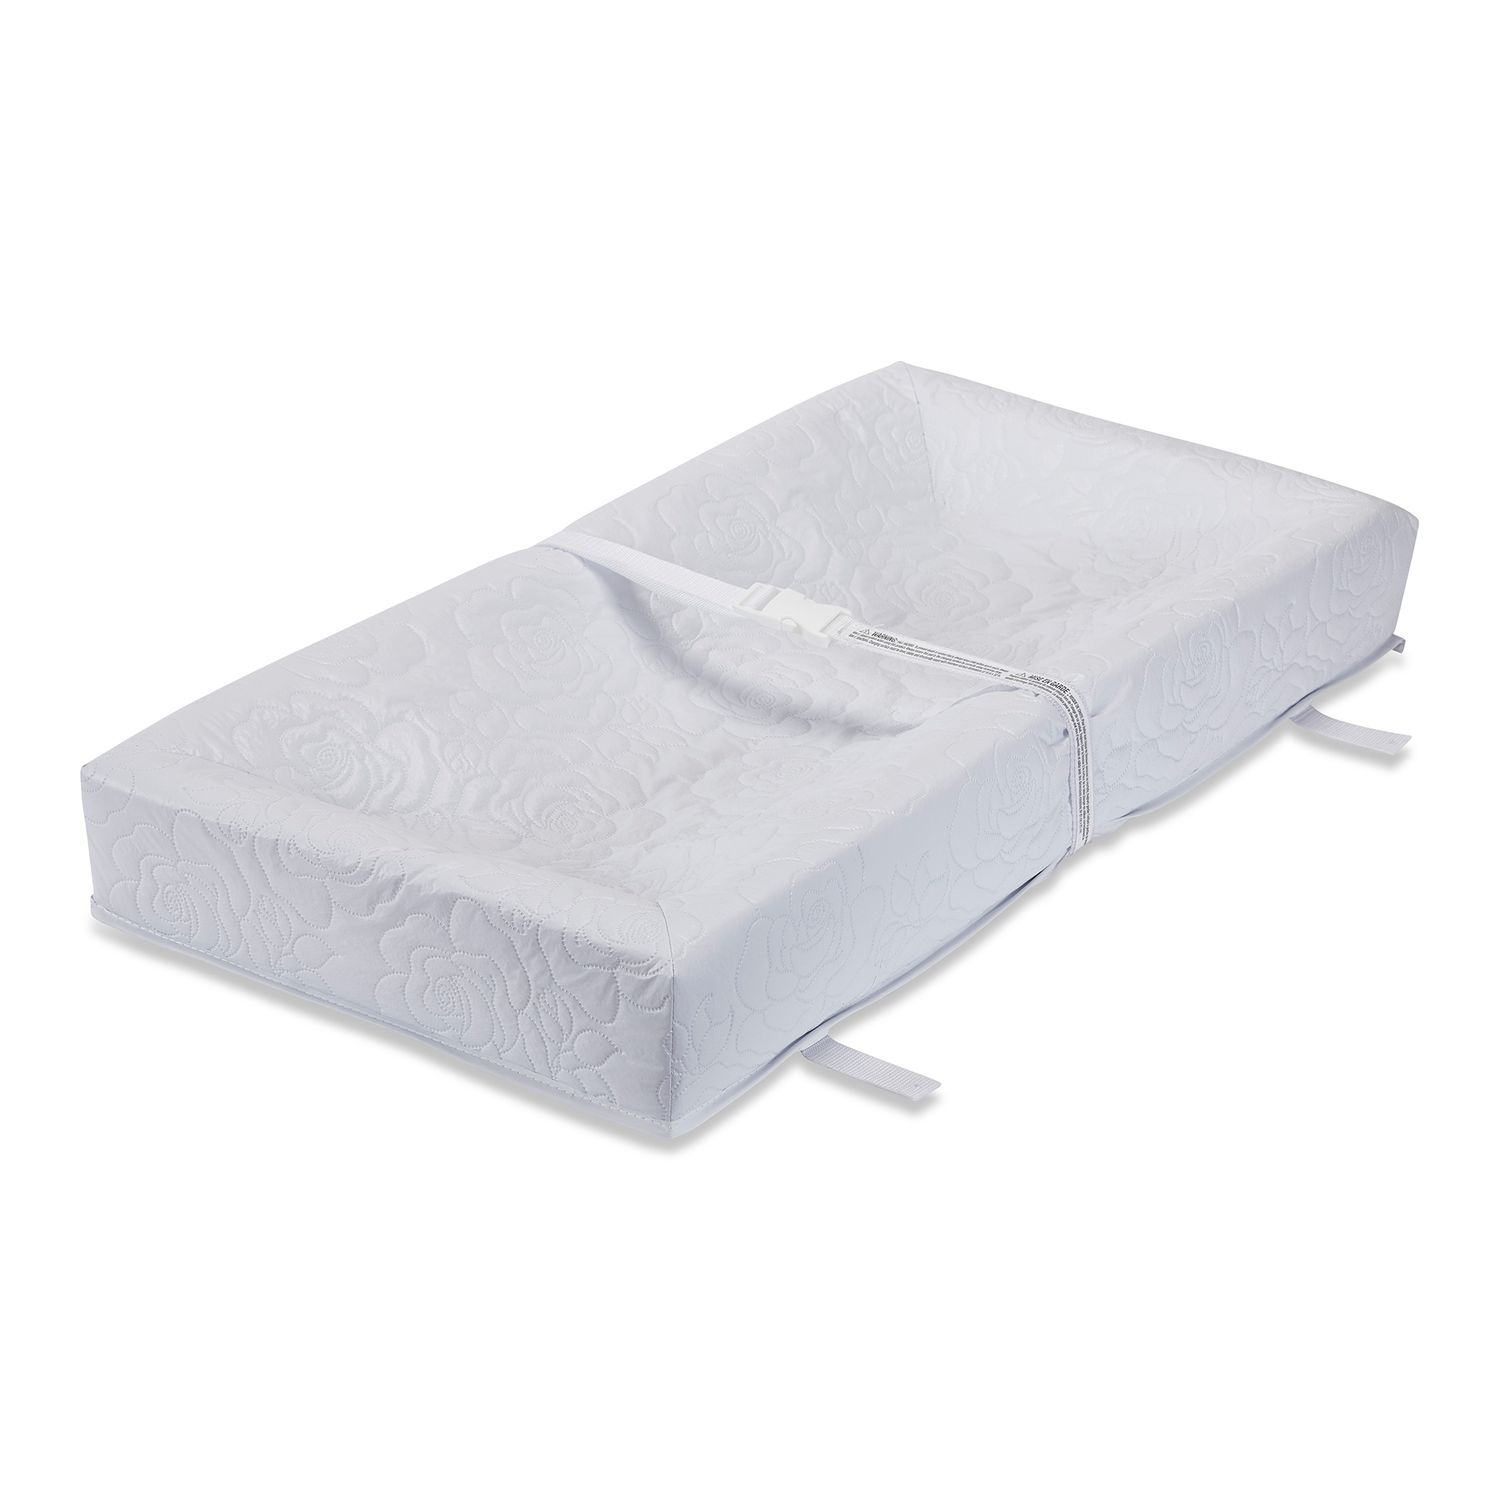 LA Baby Four-Sided Changing Pad - 34-in.